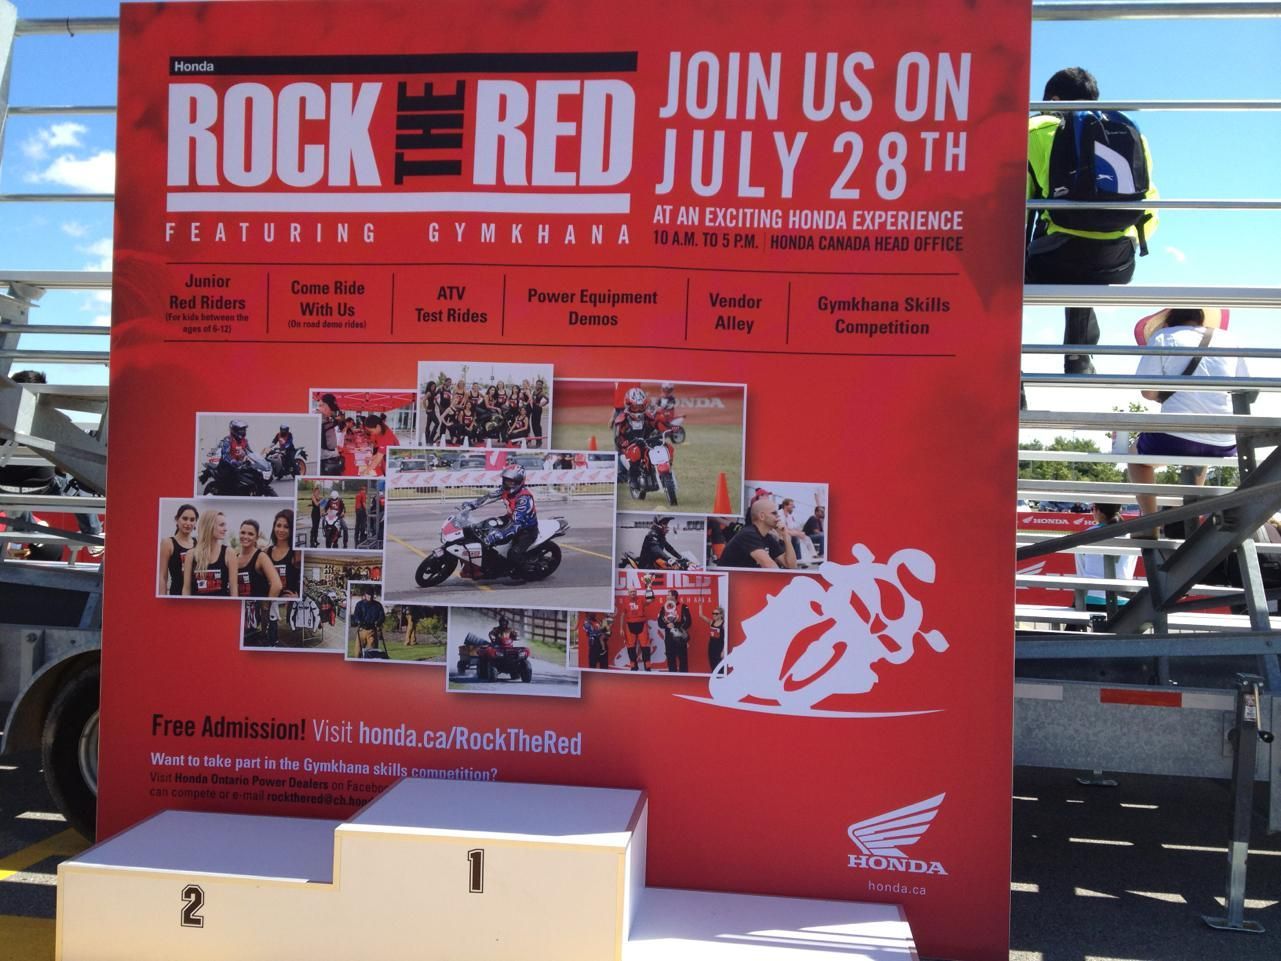 Rock The Red July 28, 2013